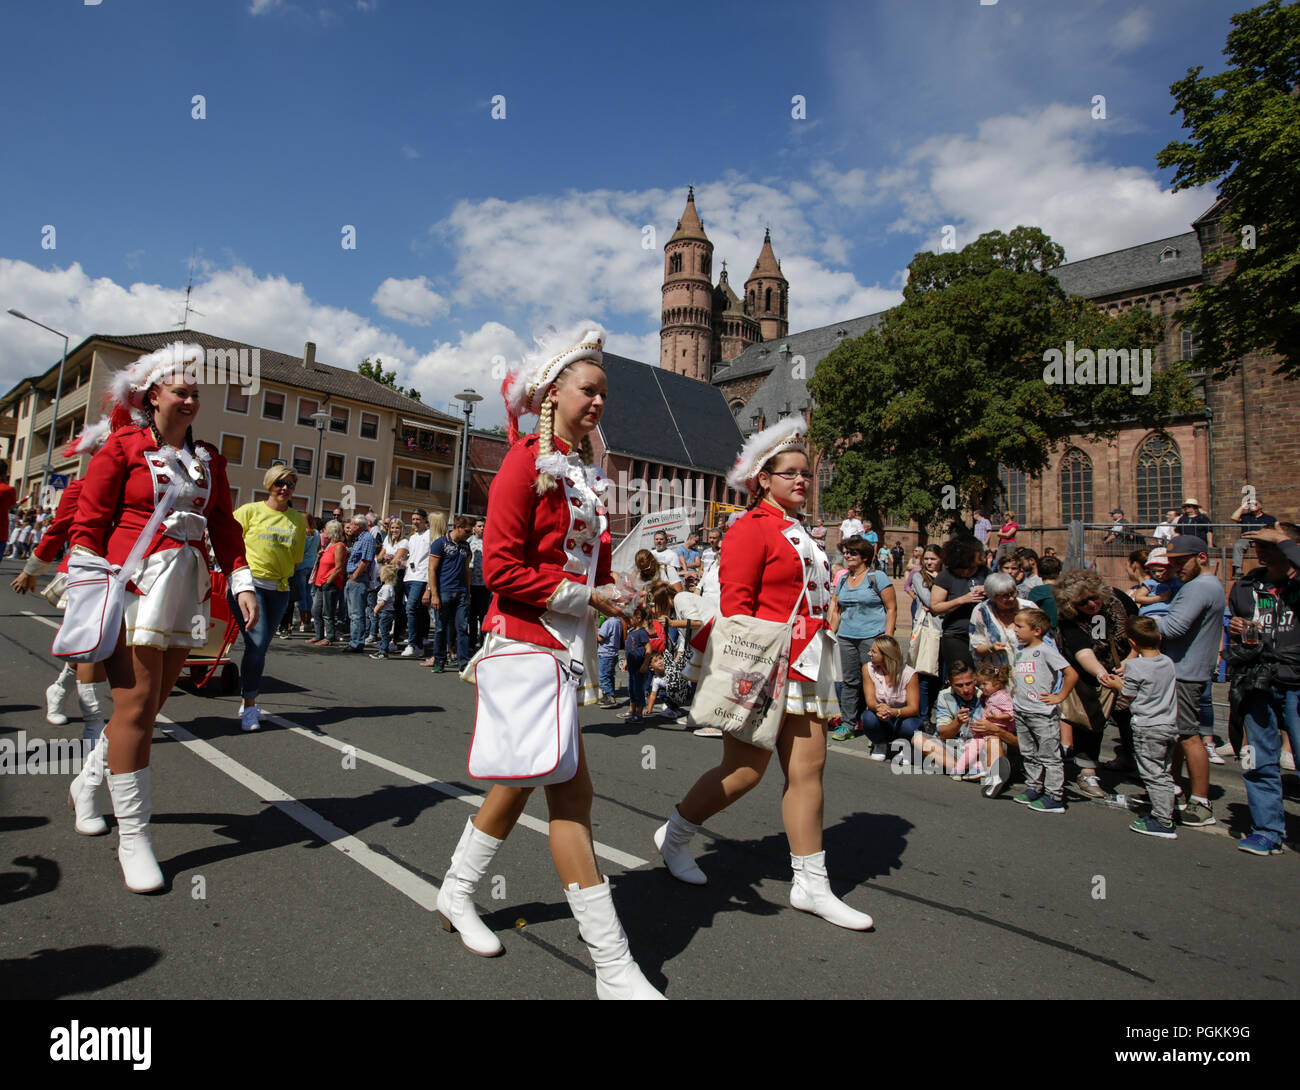 Worms, Germany. 26th Aug, 2018. Members of the Wormser Prinzengarde (Worms Guard of the Prince) march in the parade. The first highlight of the 2018 Backfischfest was the big parade through the city of Worms with over 70 groups and floats. Community groups, music groups and businesses from Worms and further afield took part. Credit: Michael Debets/Pacific Press/Alamy Live News Stock Photo